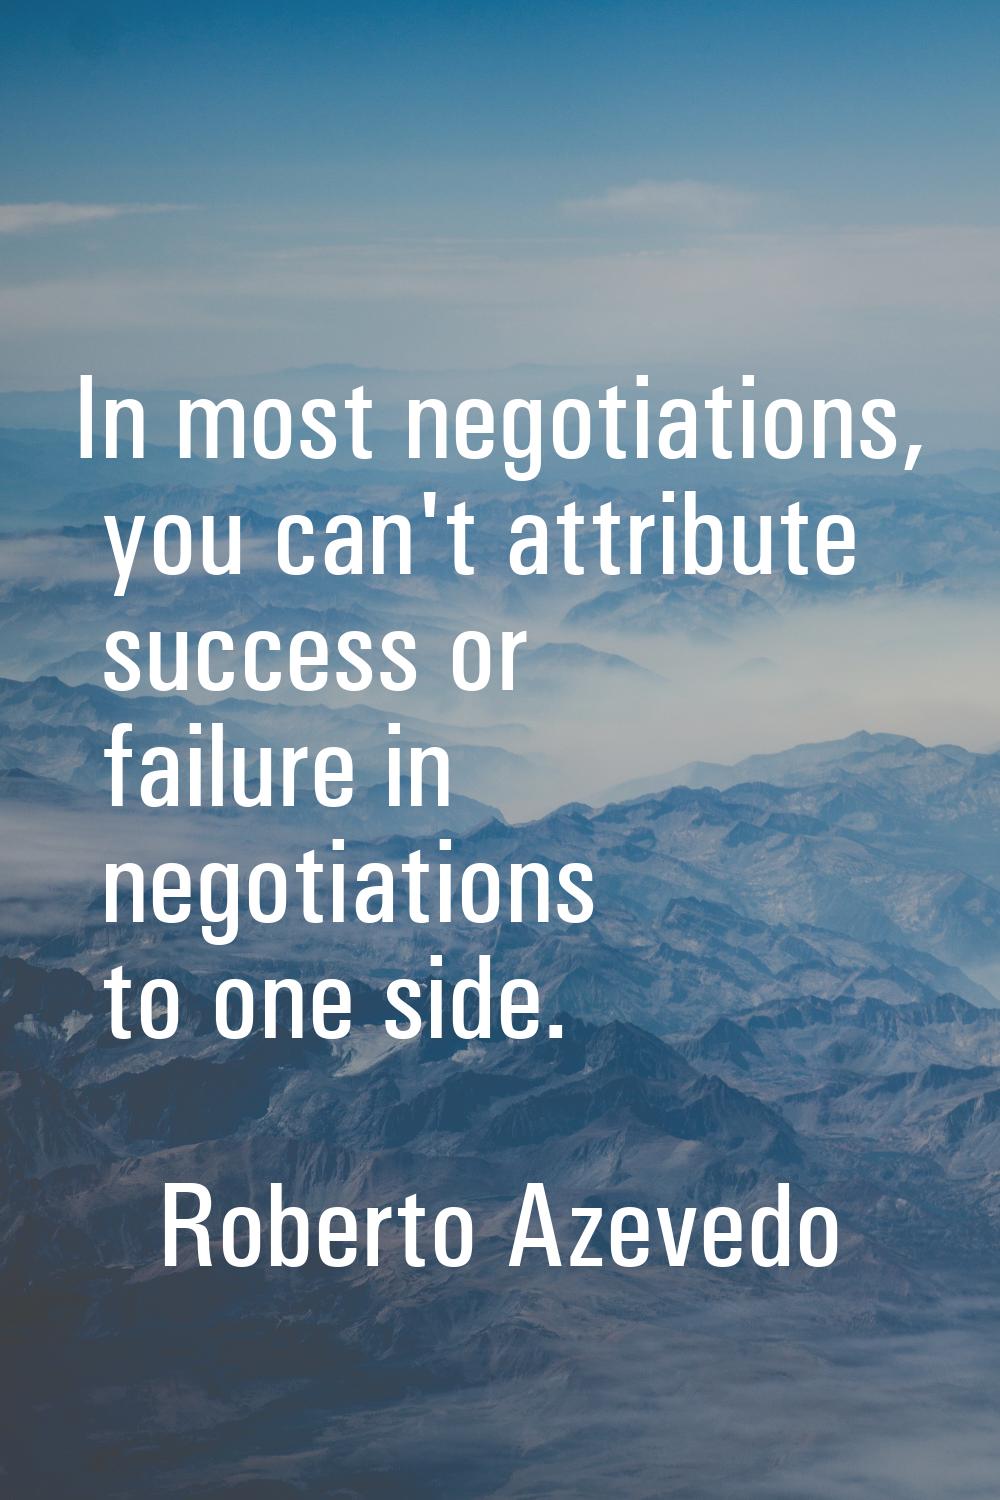 In most negotiations, you can't attribute success or failure in negotiations to one side.